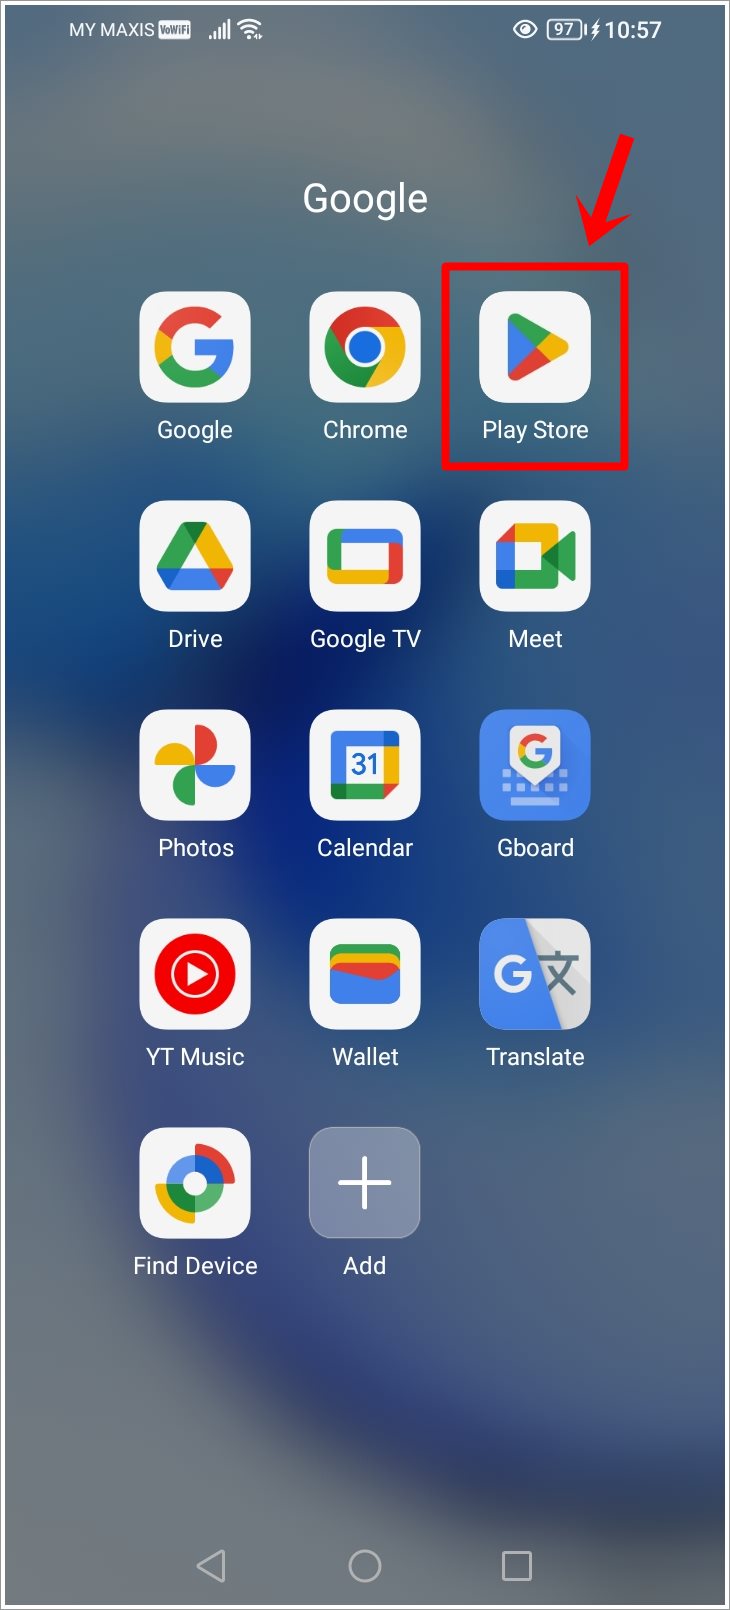 This is a screenshot of an Android phone with the Play Store icon highlighted.